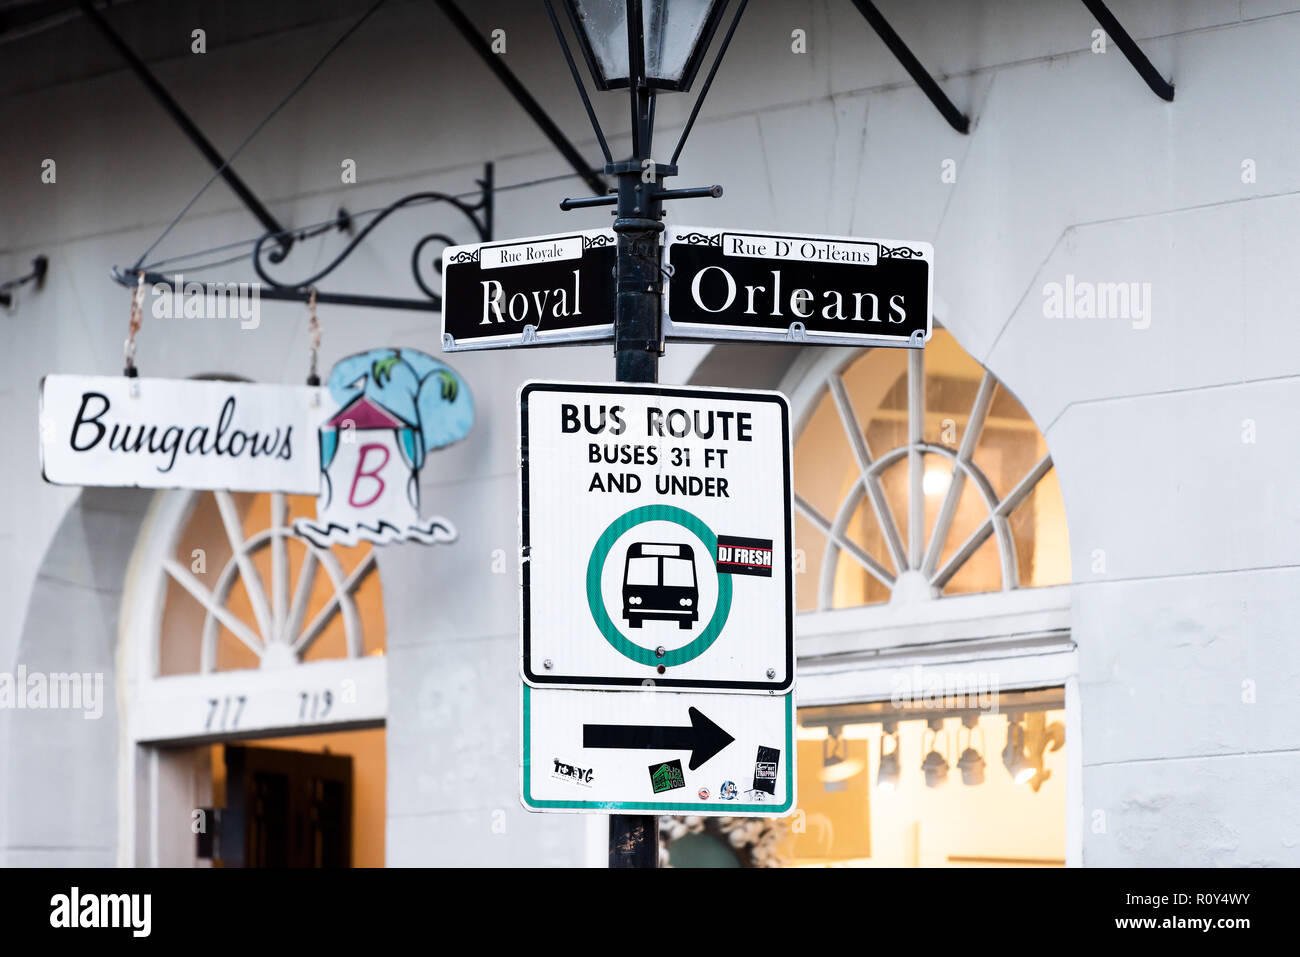 New Orleans, USA - April 22, 2018: Old town Royal Royale street intersection sign in Louisiana town, city, Bungalows store during evening, bus route Stock Photo